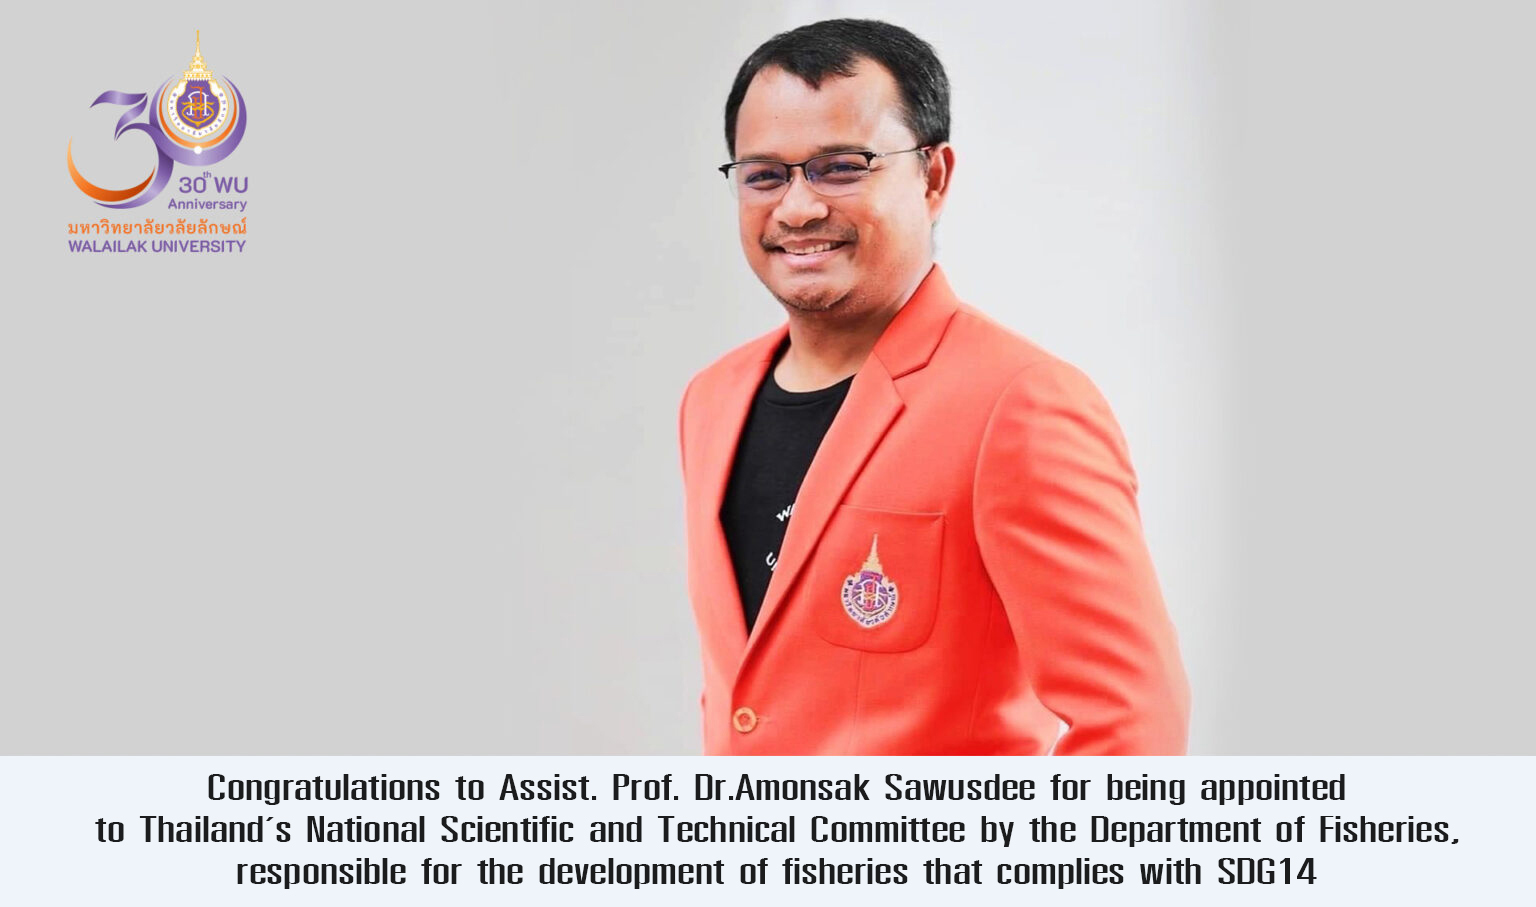 Congratulations to Assist. Prof. Dr.Amonsak Sawusdee for being appointed to Thailand’s National Scientific and Technical Committee by the Department of Fisheries